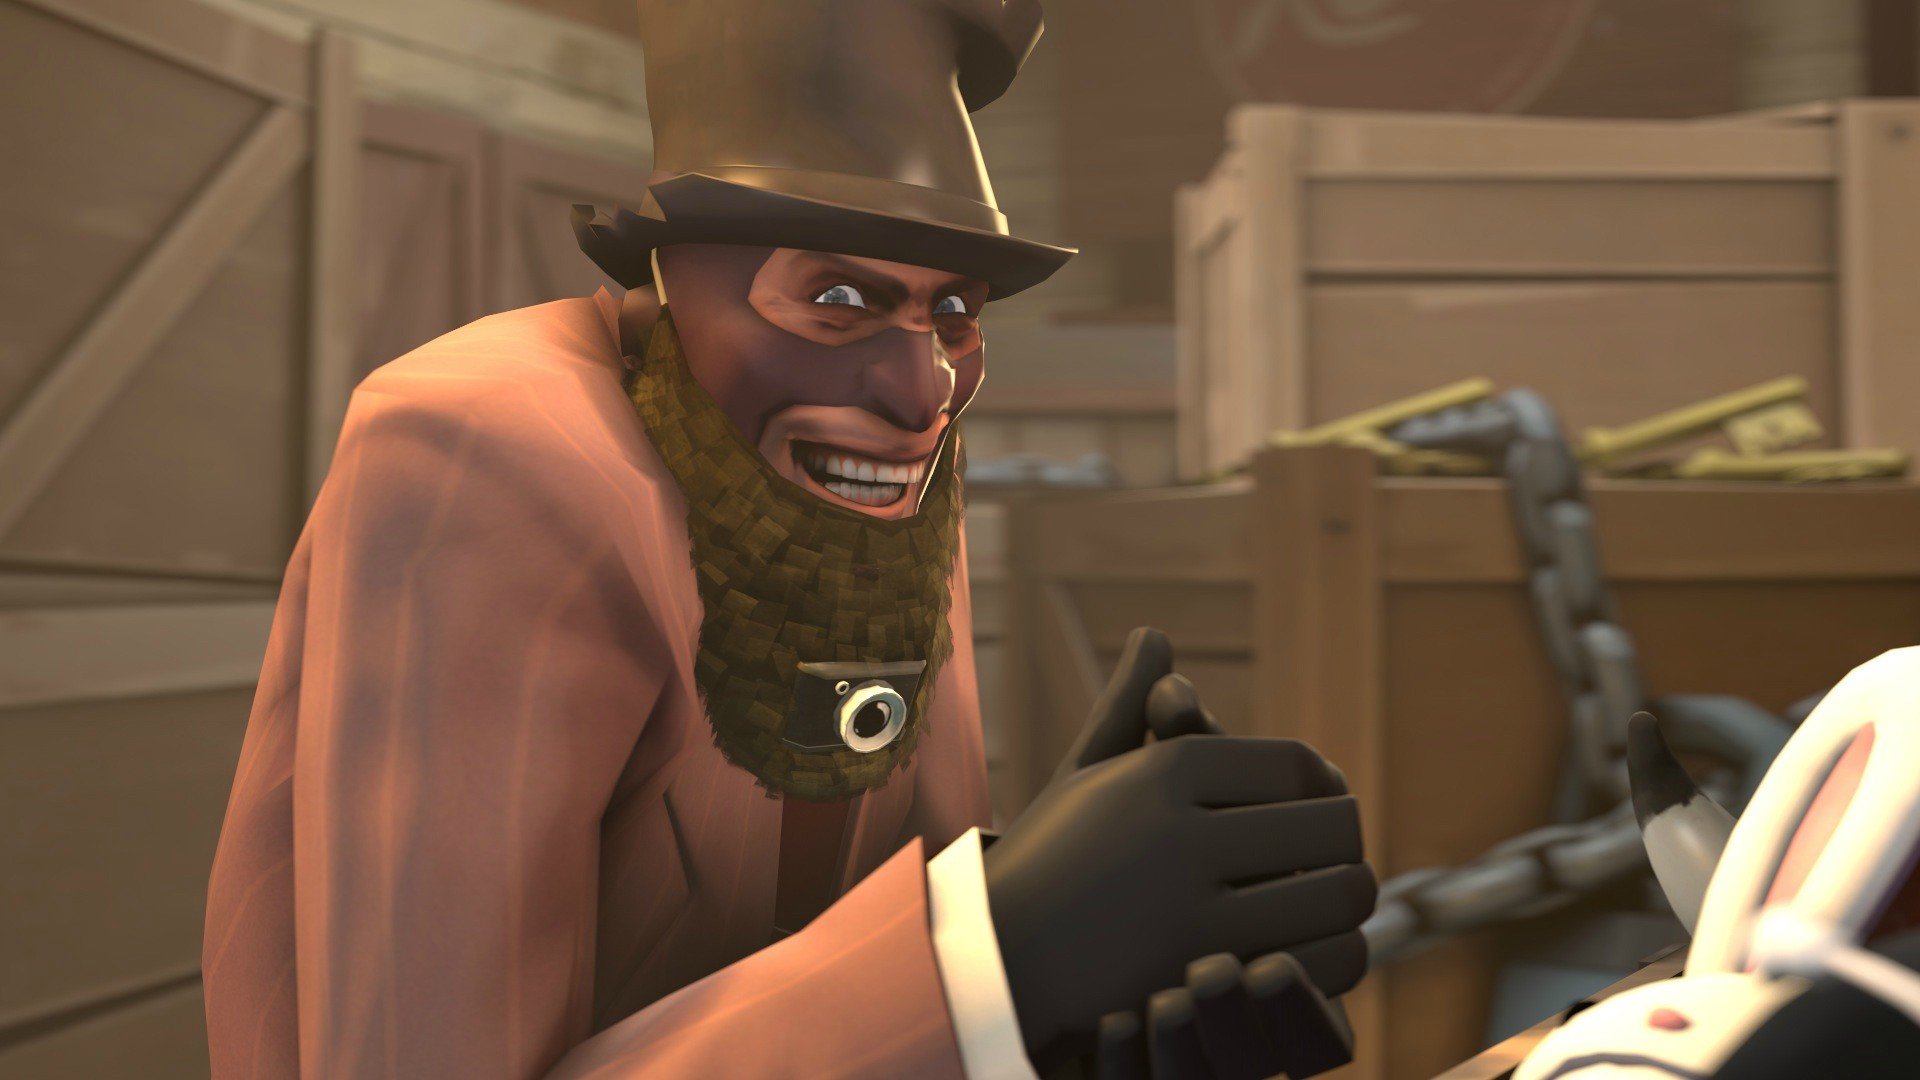 Team Fortress 2 (TF2) HD Backgrounds for 1920x1080 Full HD (1080p) desktop.